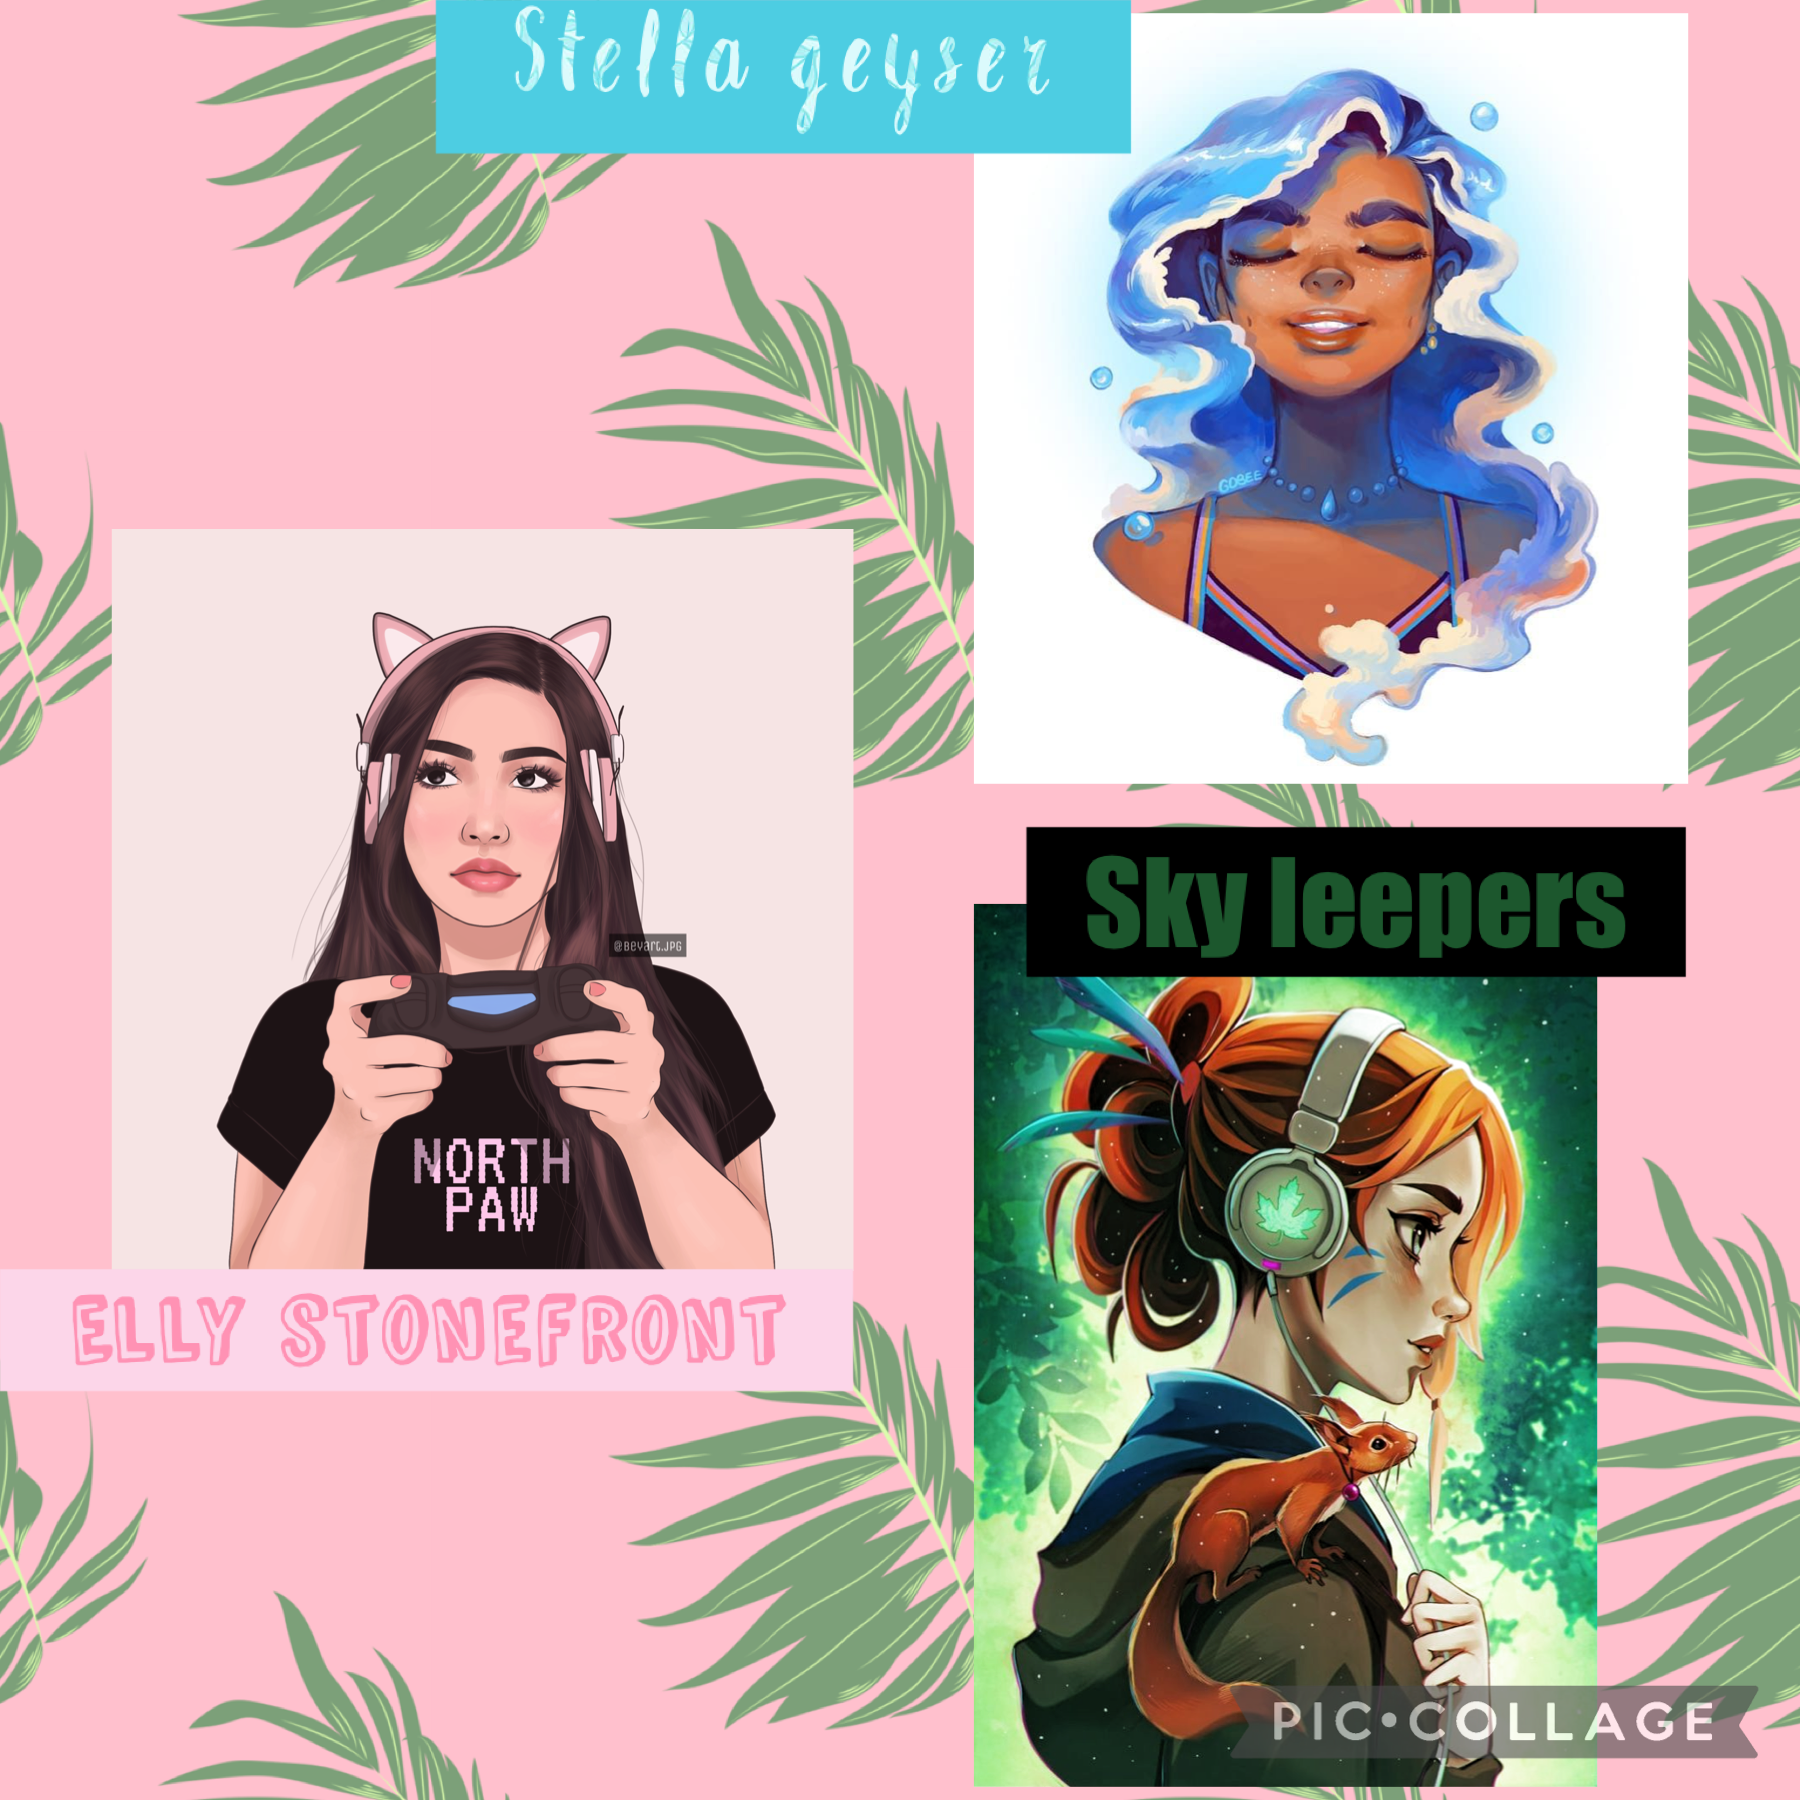 Stella enjoys the ocean and sea life 

Elly enjoys gaming and cats

Sky enjoys hard rock and wildlife 